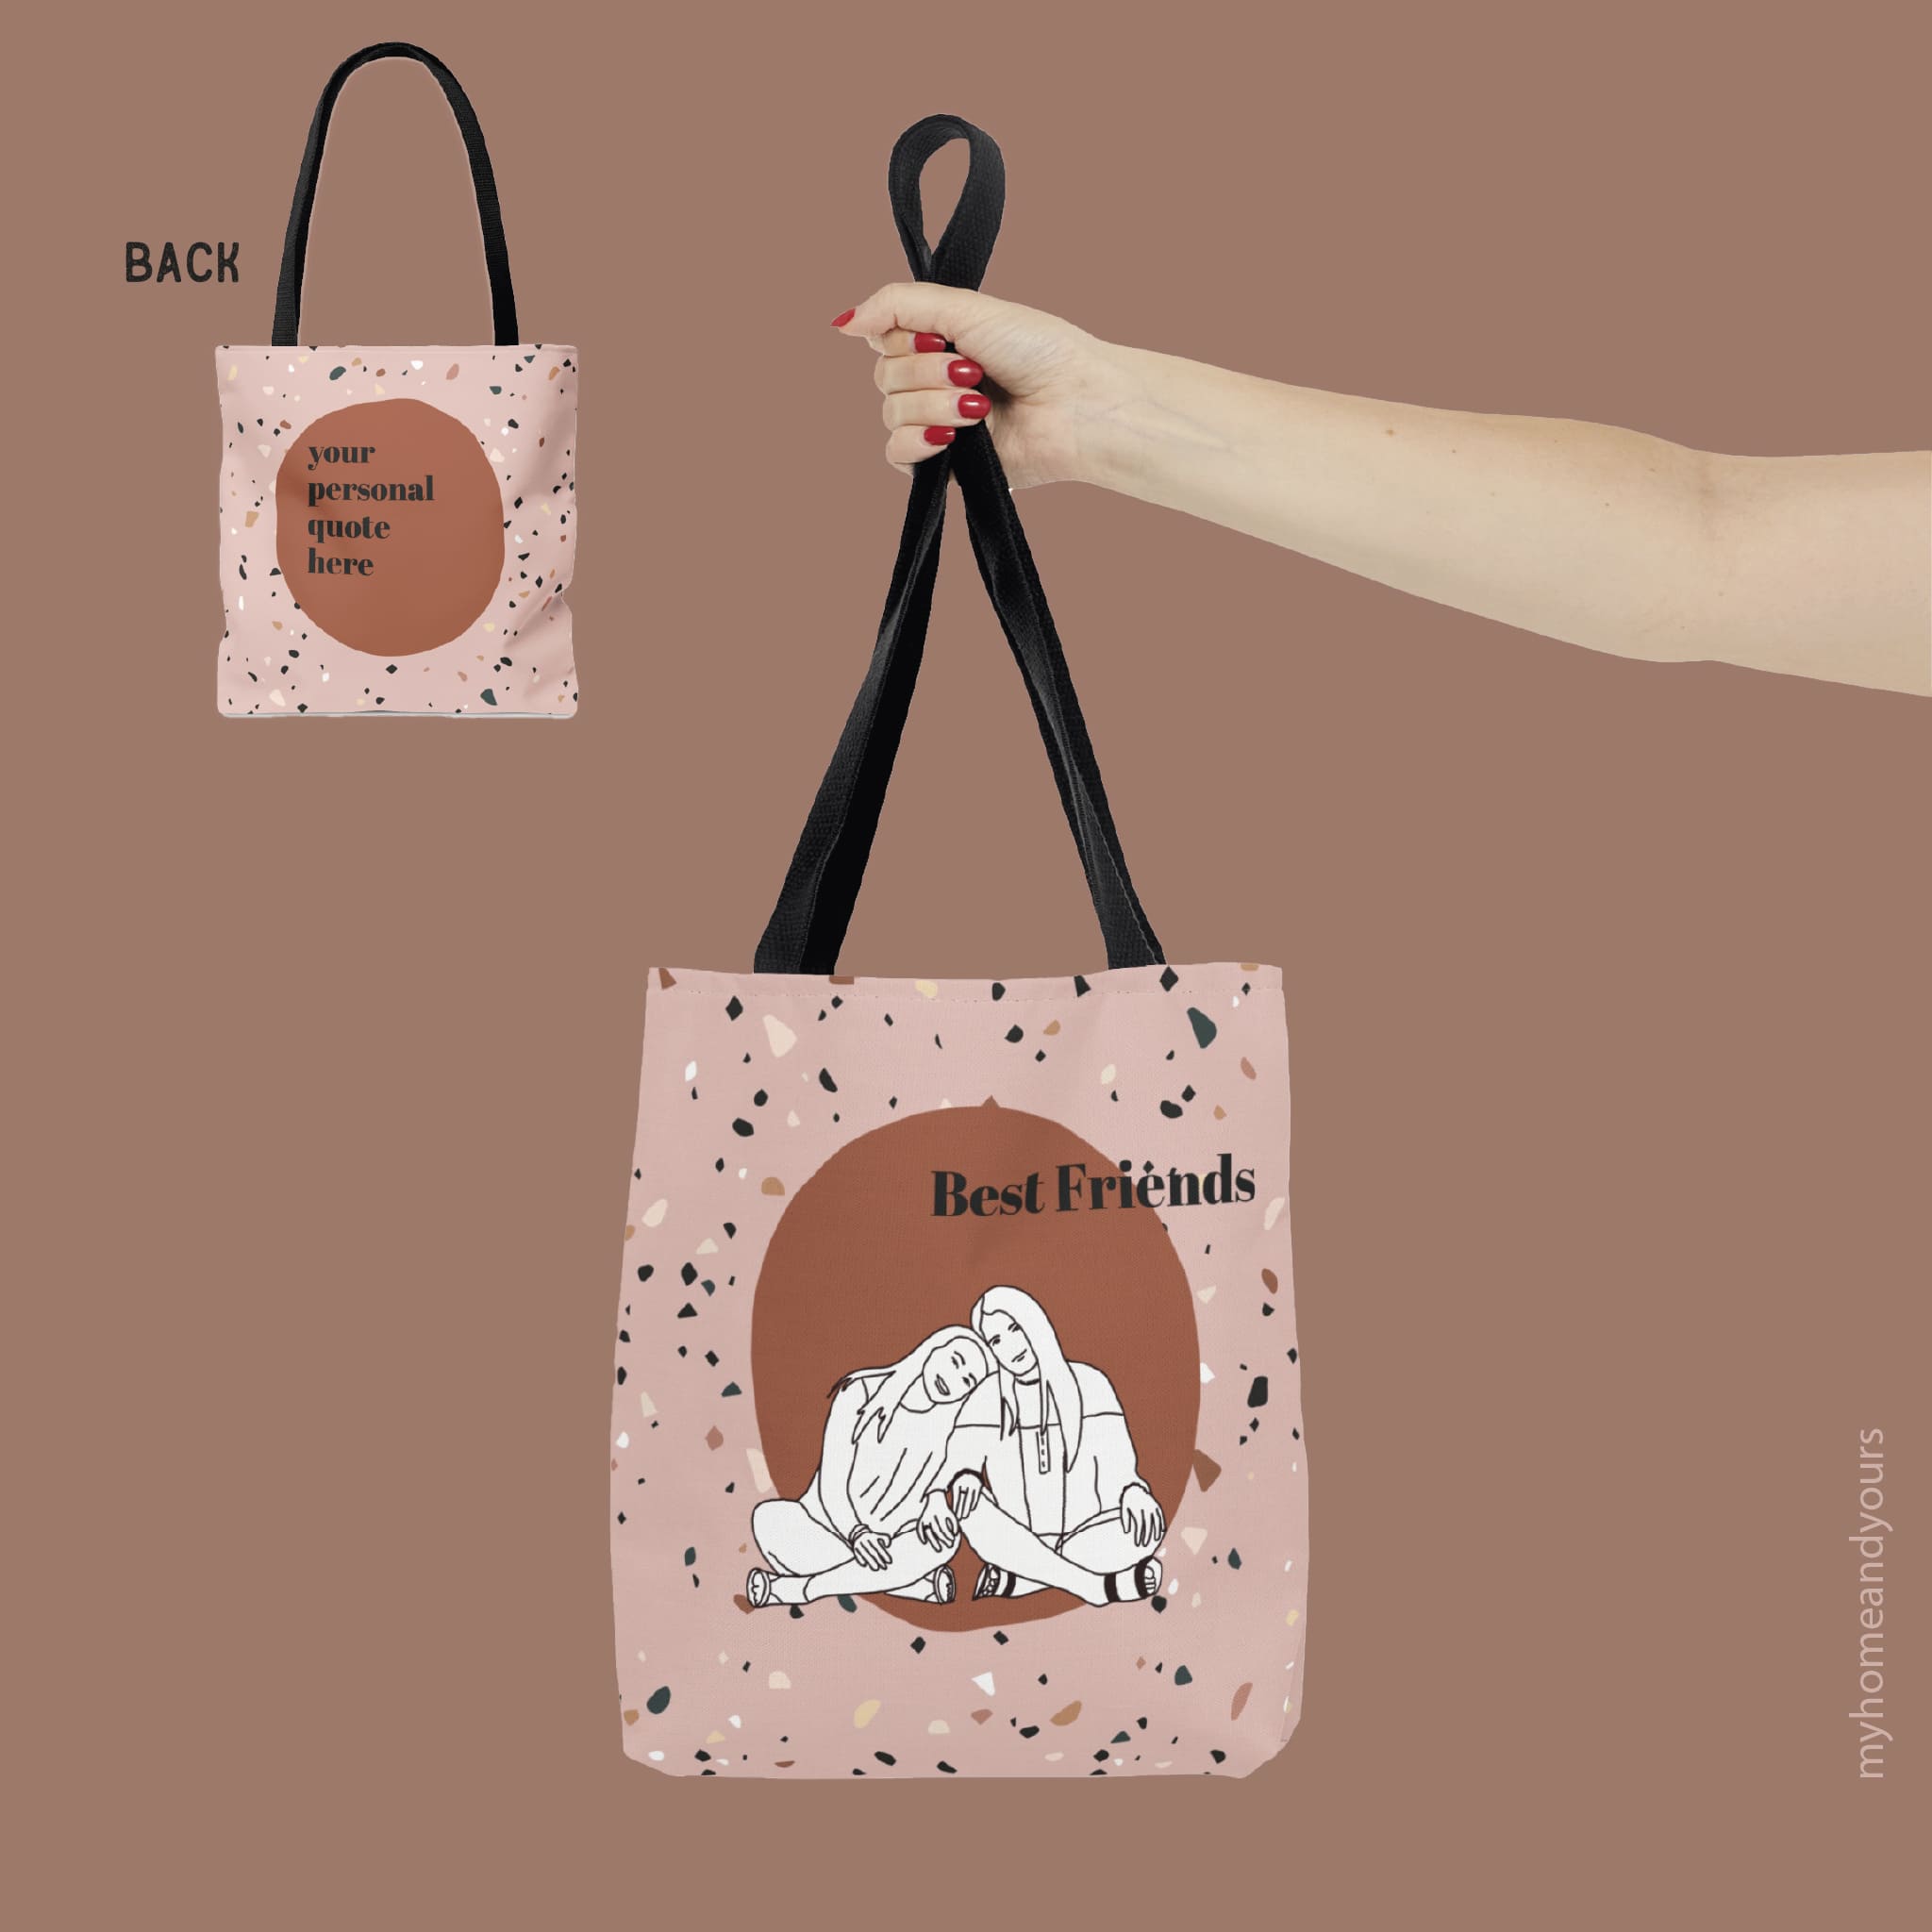 custom best friend bags with line art portrait illustration from your photo on fashionable and color full terrazzo patterned back ground and color blocking designs